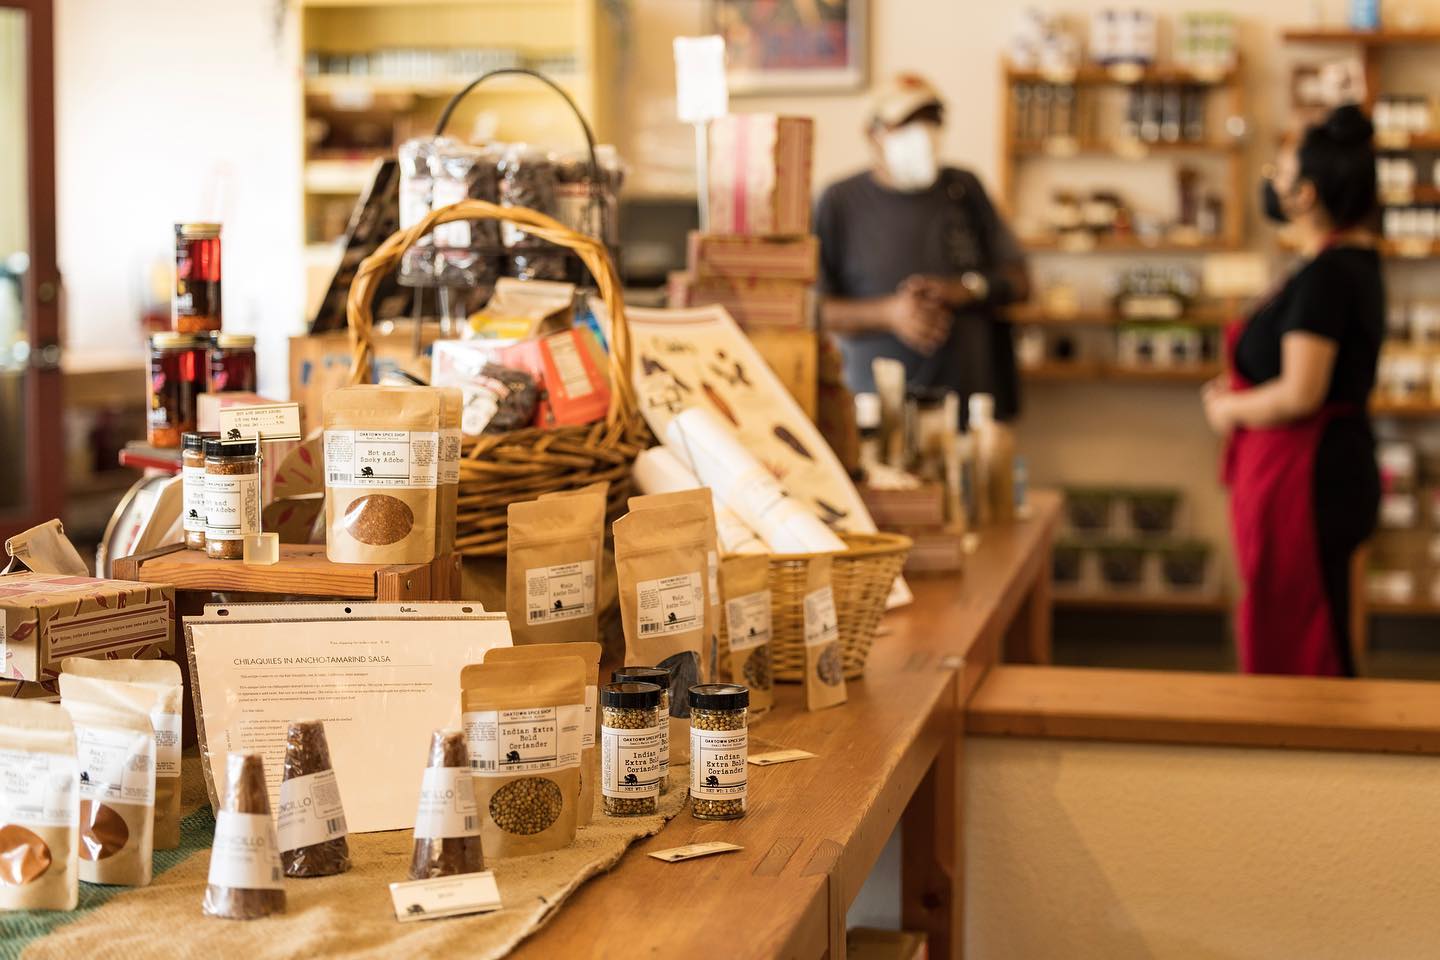 Oaktown Spice Shop: High-quality spices, herbs and hand-mixed blends